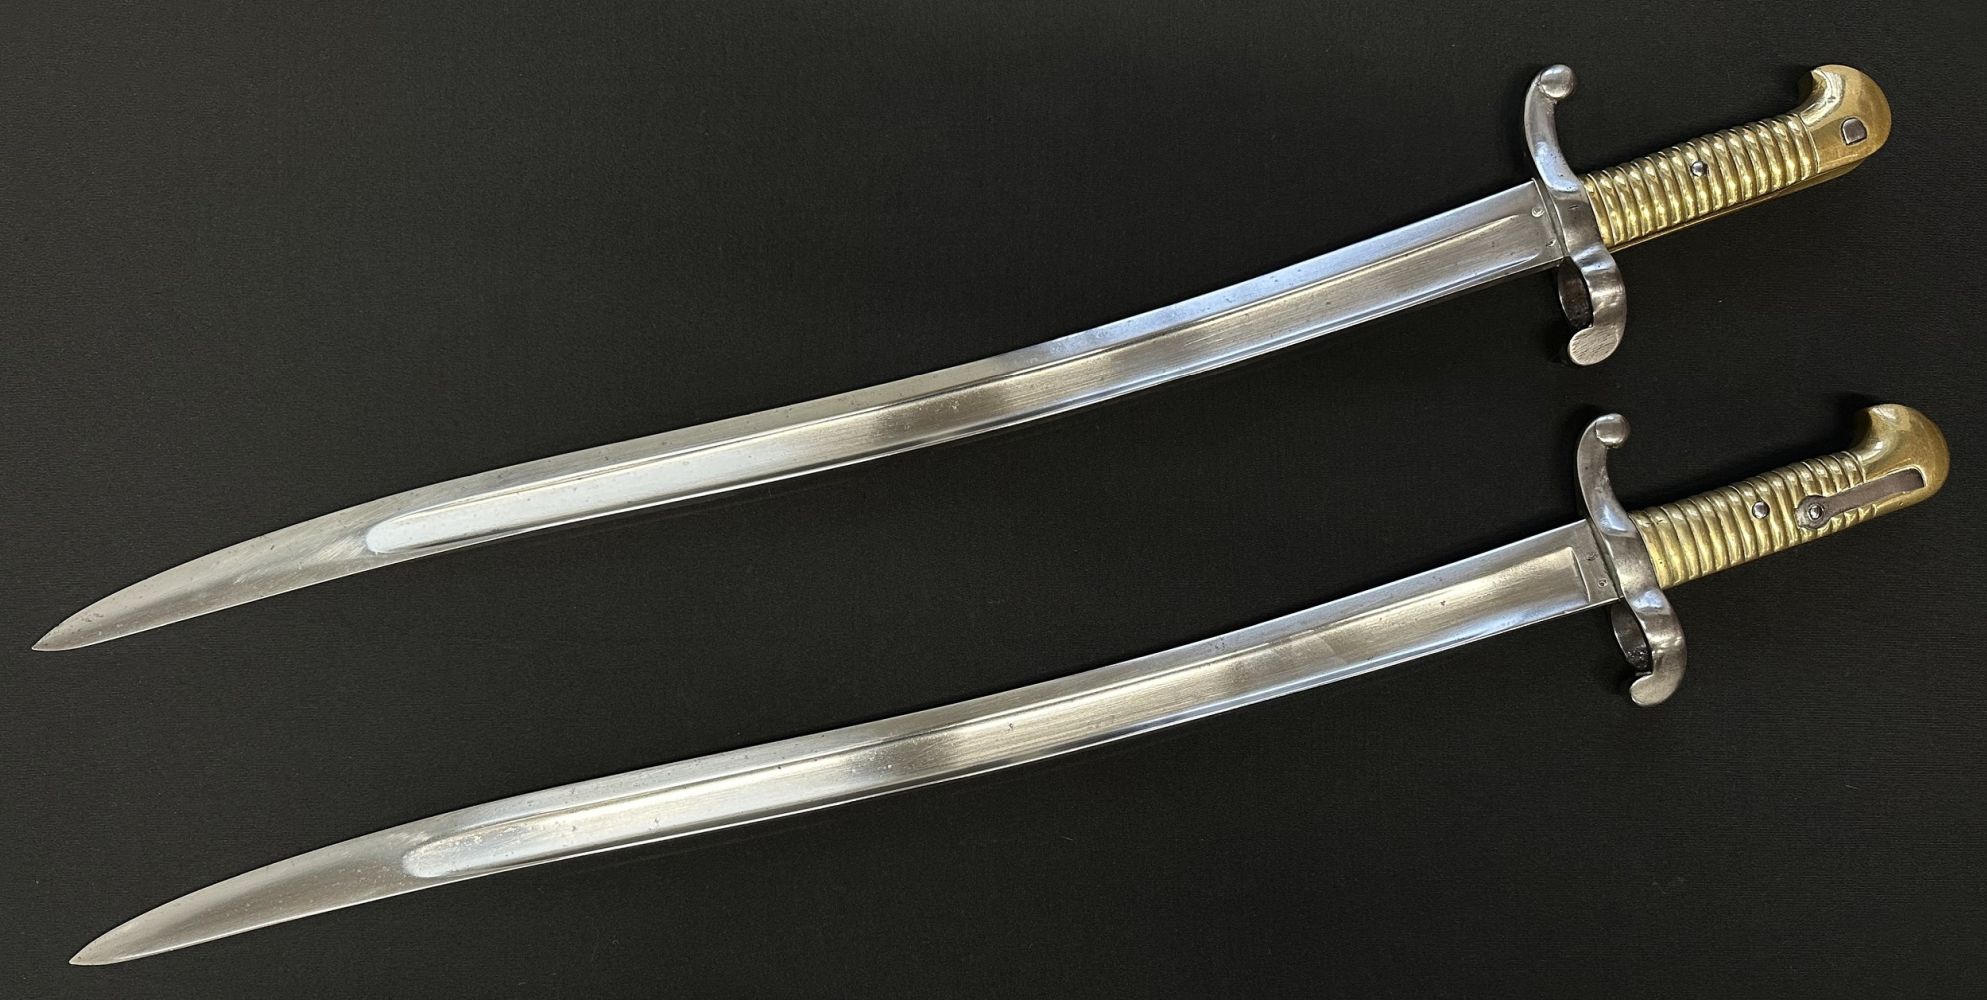 French 1842 Yataghan Pattern Bayonet with single edged fullered blade 574mm in length. Spine of - Image 2 of 14